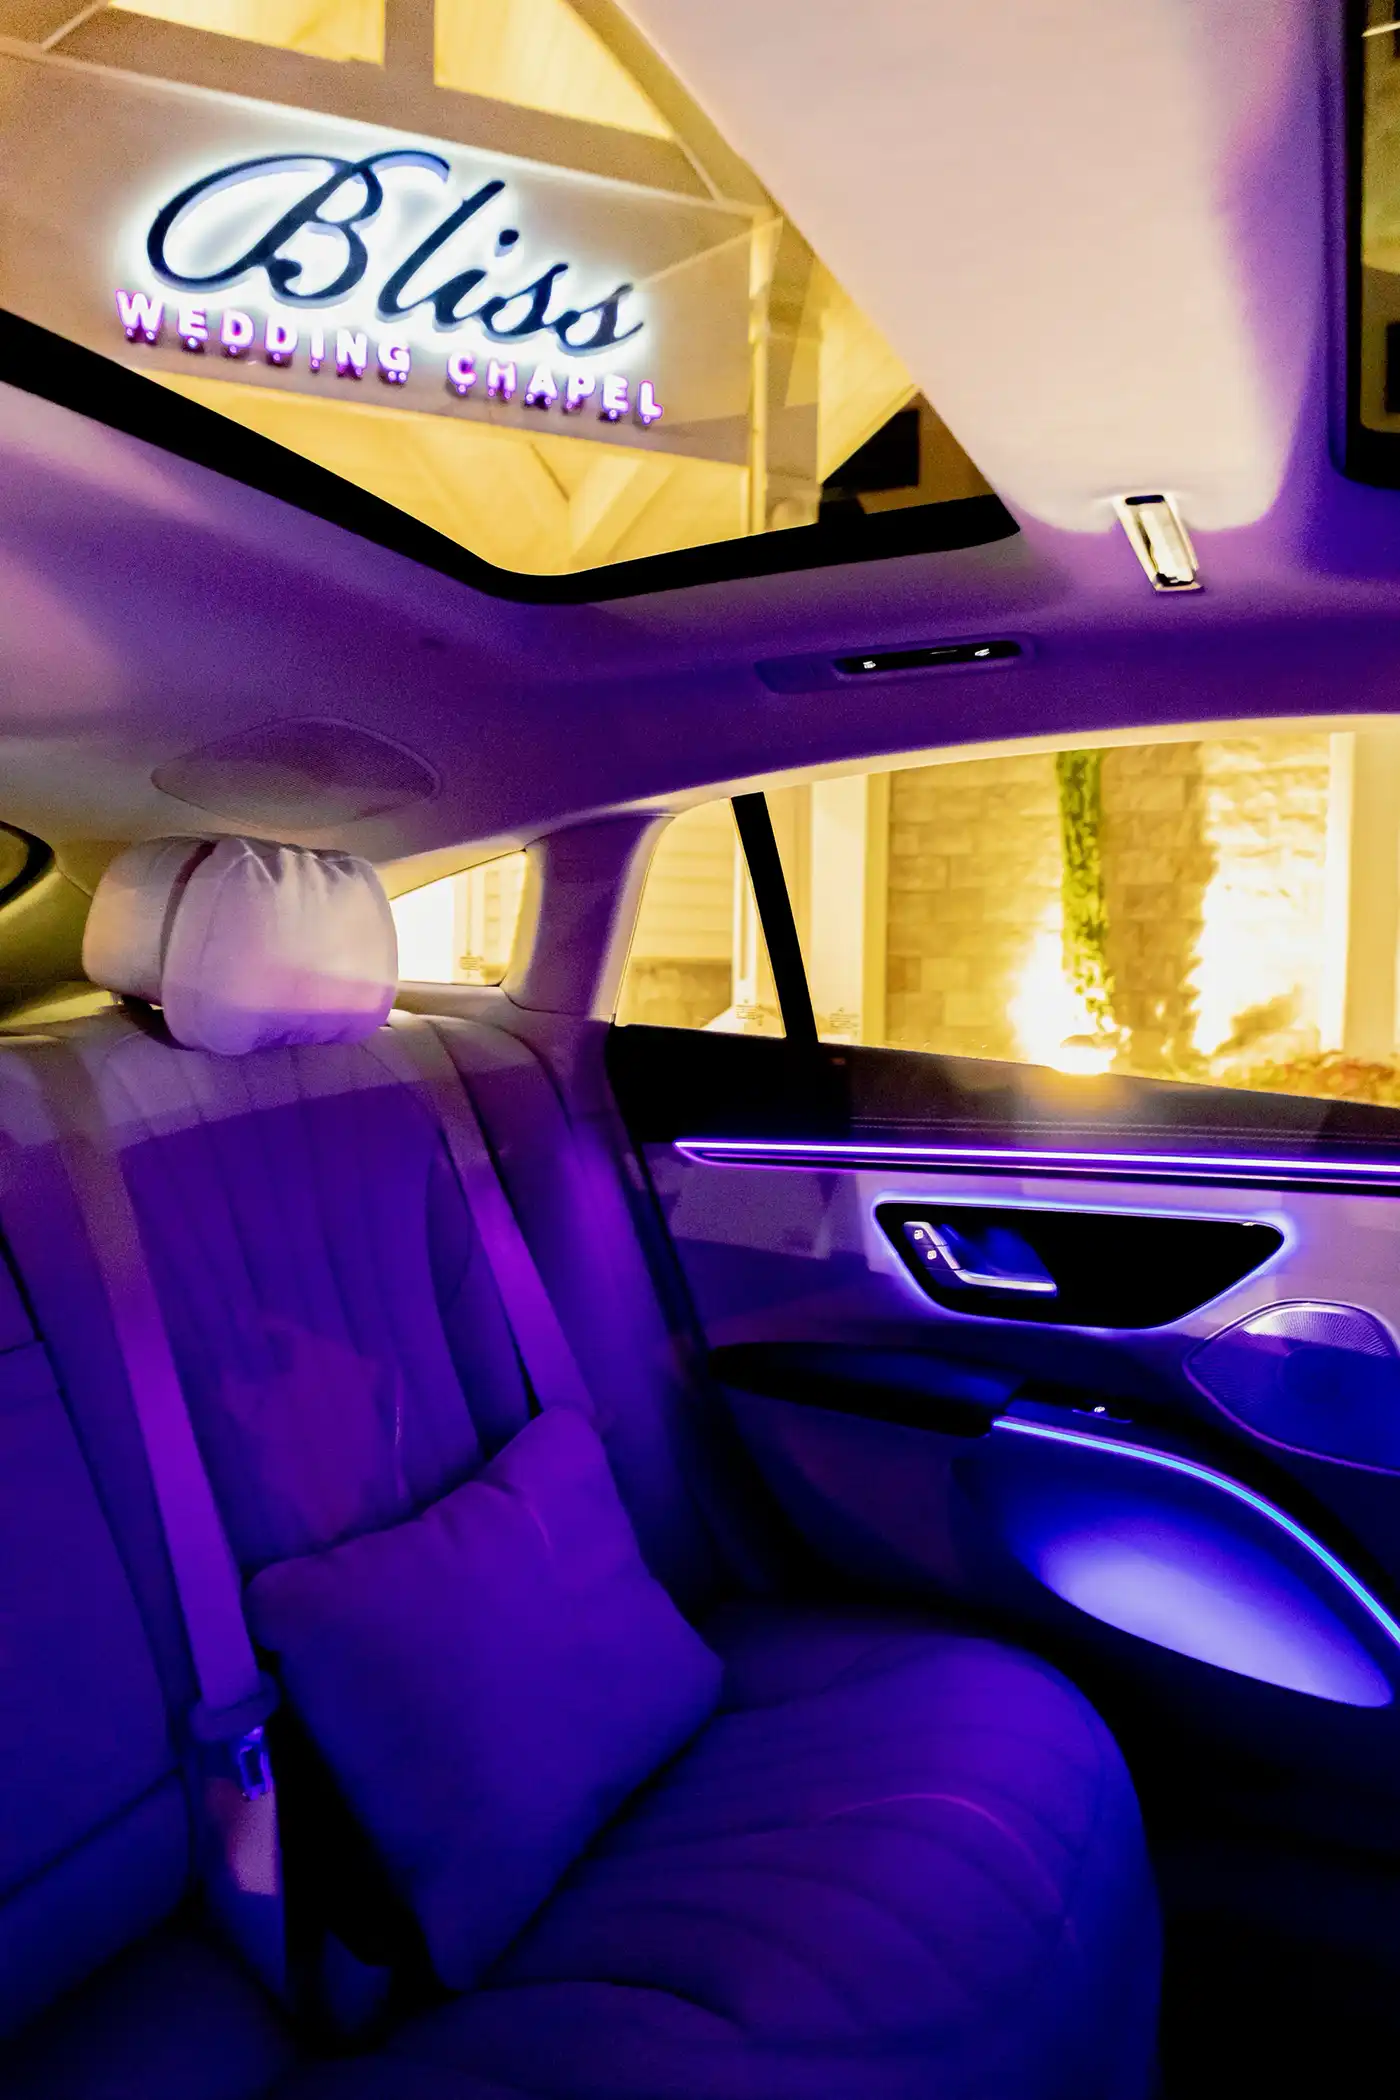 Mercedes EQS Luxury Transportation Interior with Bliss Wedding Chapel in background